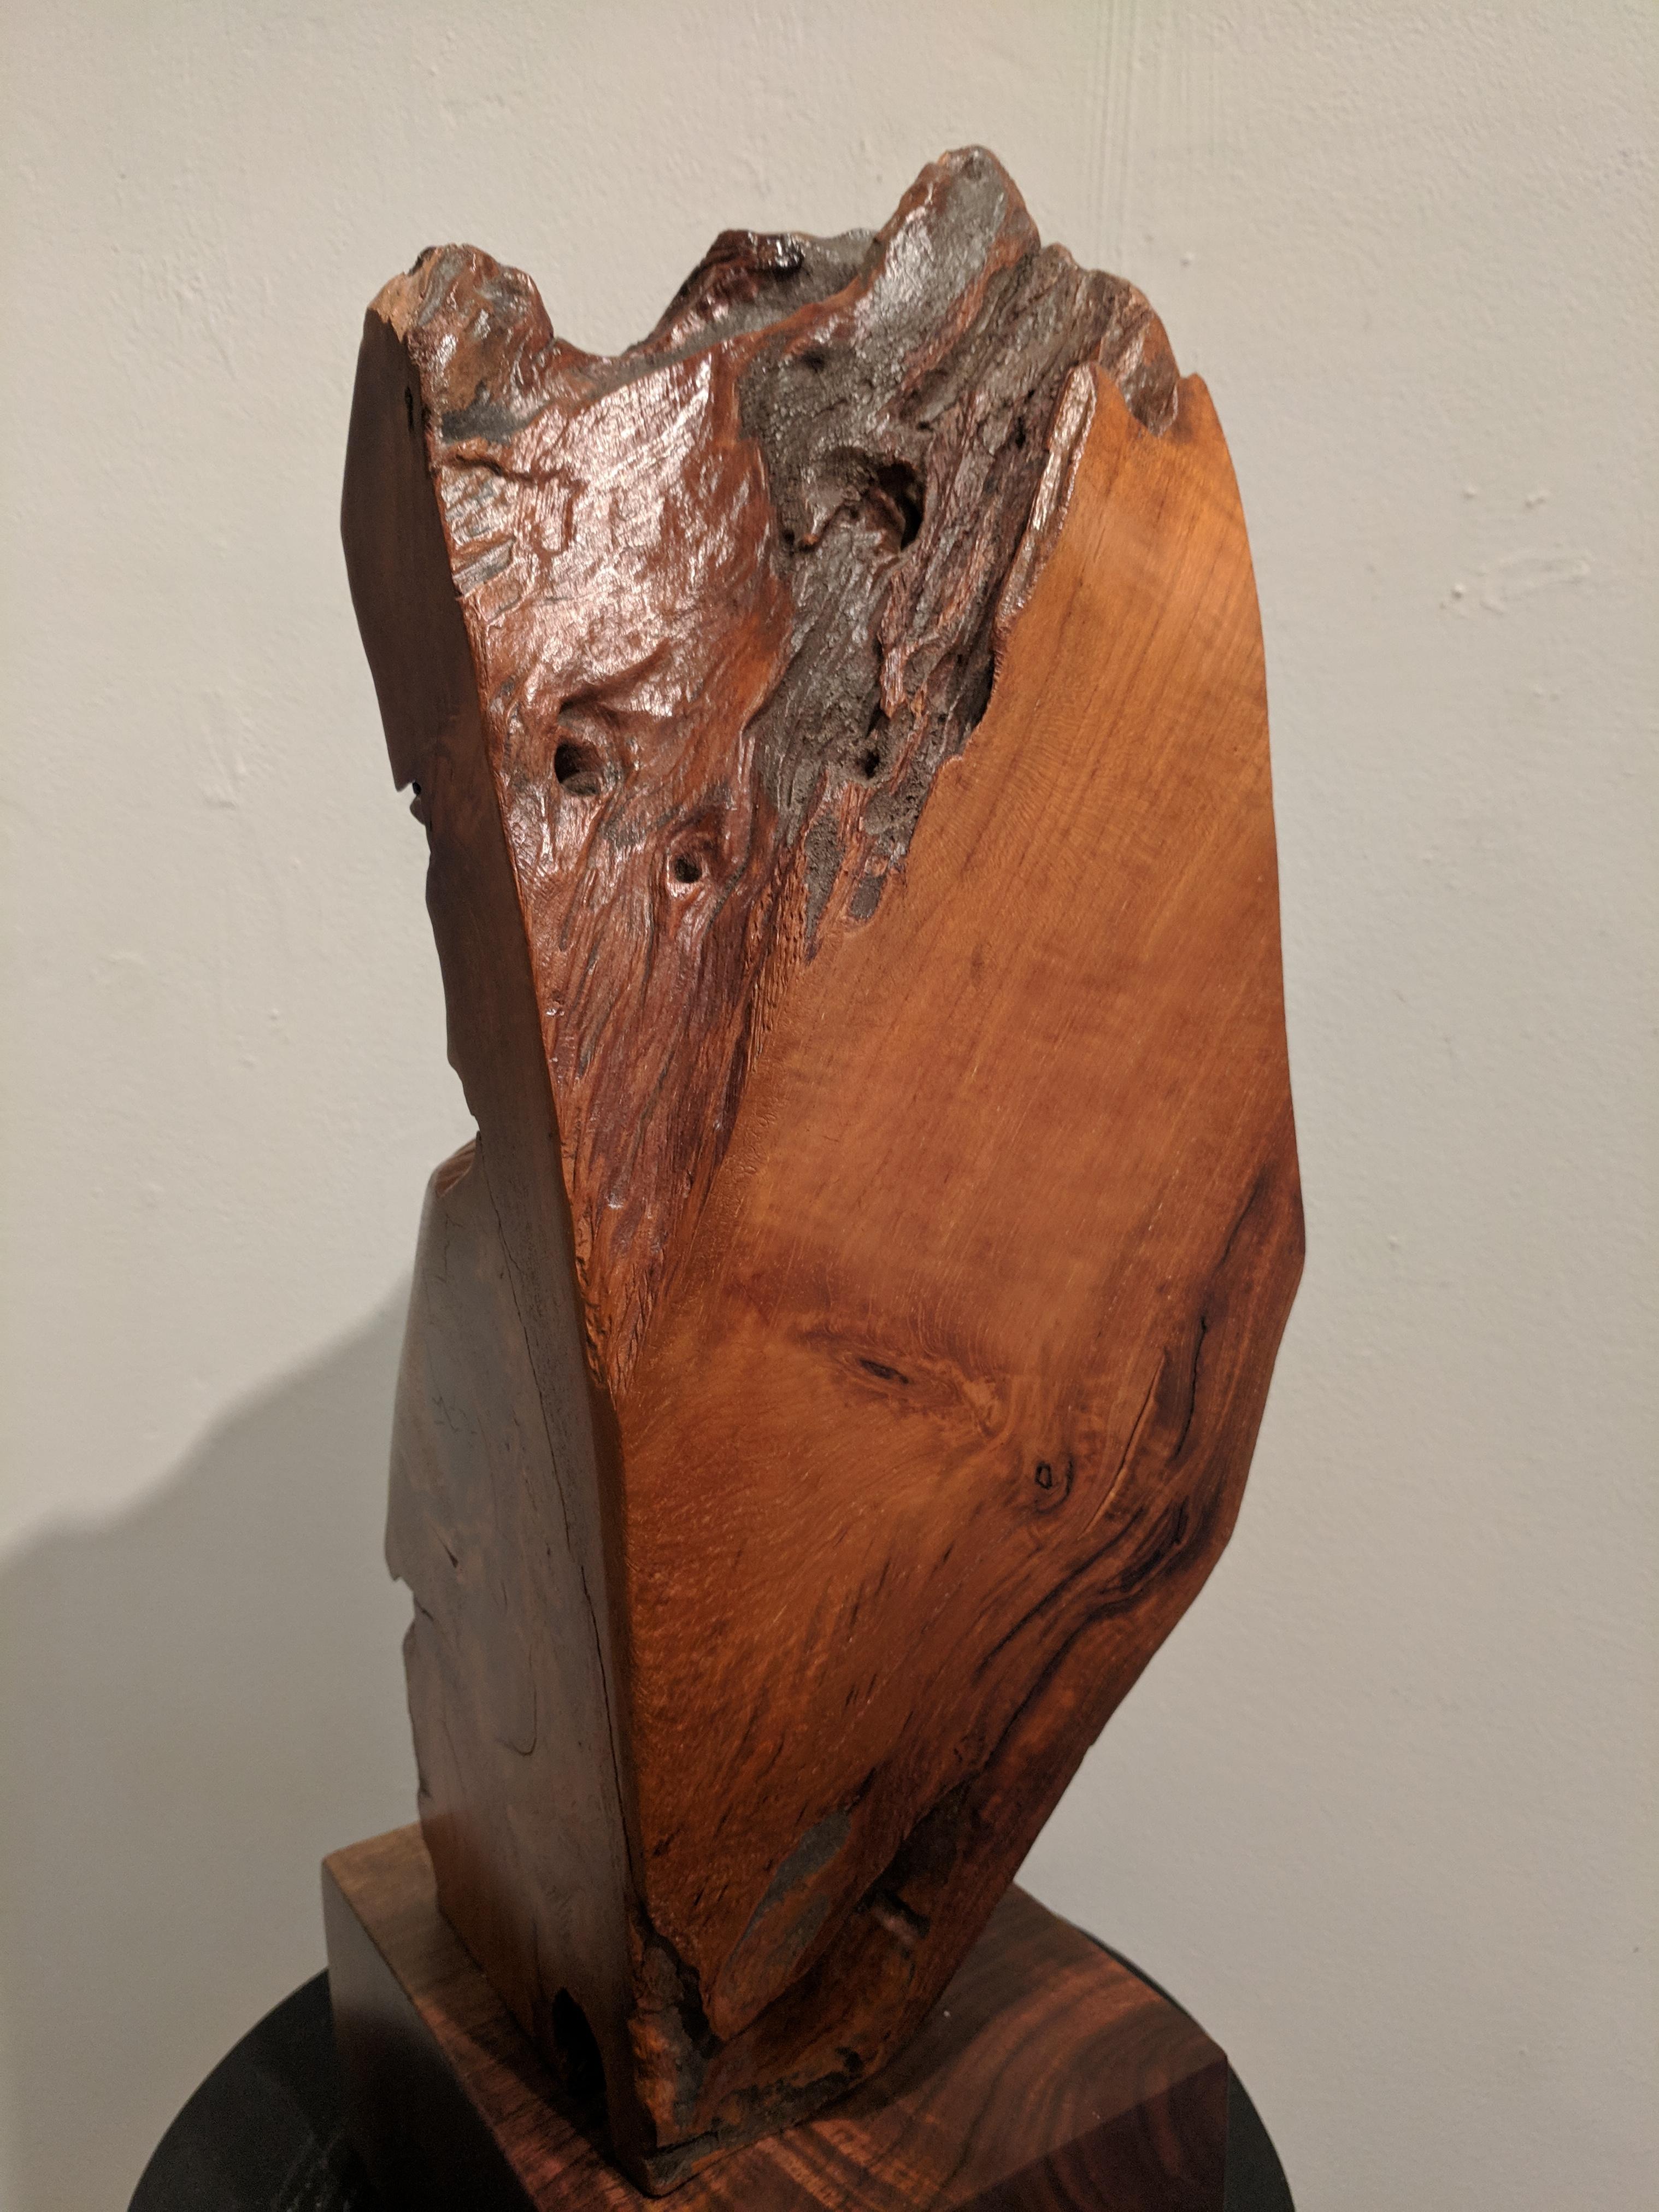 This abstract wooden sculpture is made from African Teak root on a Claro Walnut base. This is an organic piece with deep brown shadings and varying textures. The sculpture is a stunning and sophisticated piece, sure to draw attention.

Since